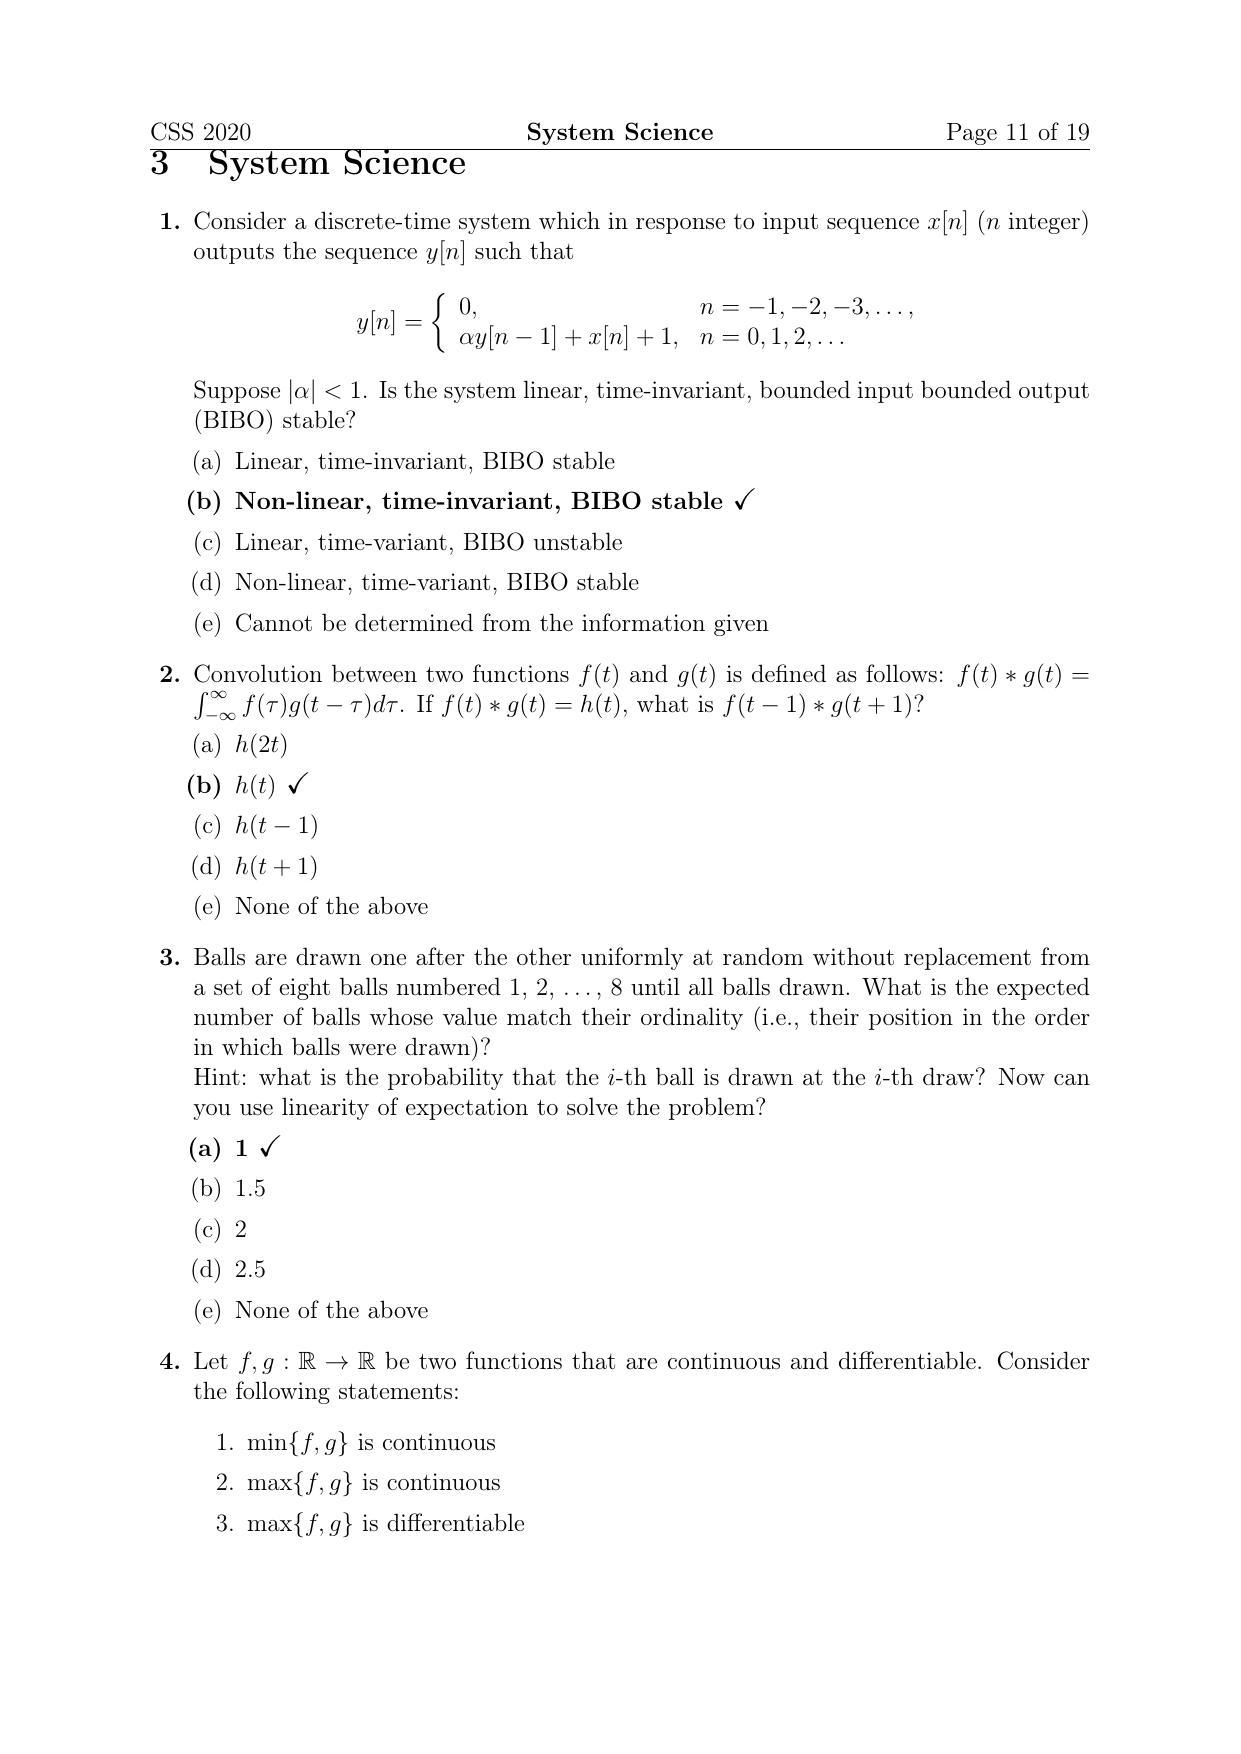 TIFR GS 2020 Computer & Systems Sciences Question Paper - Page 11